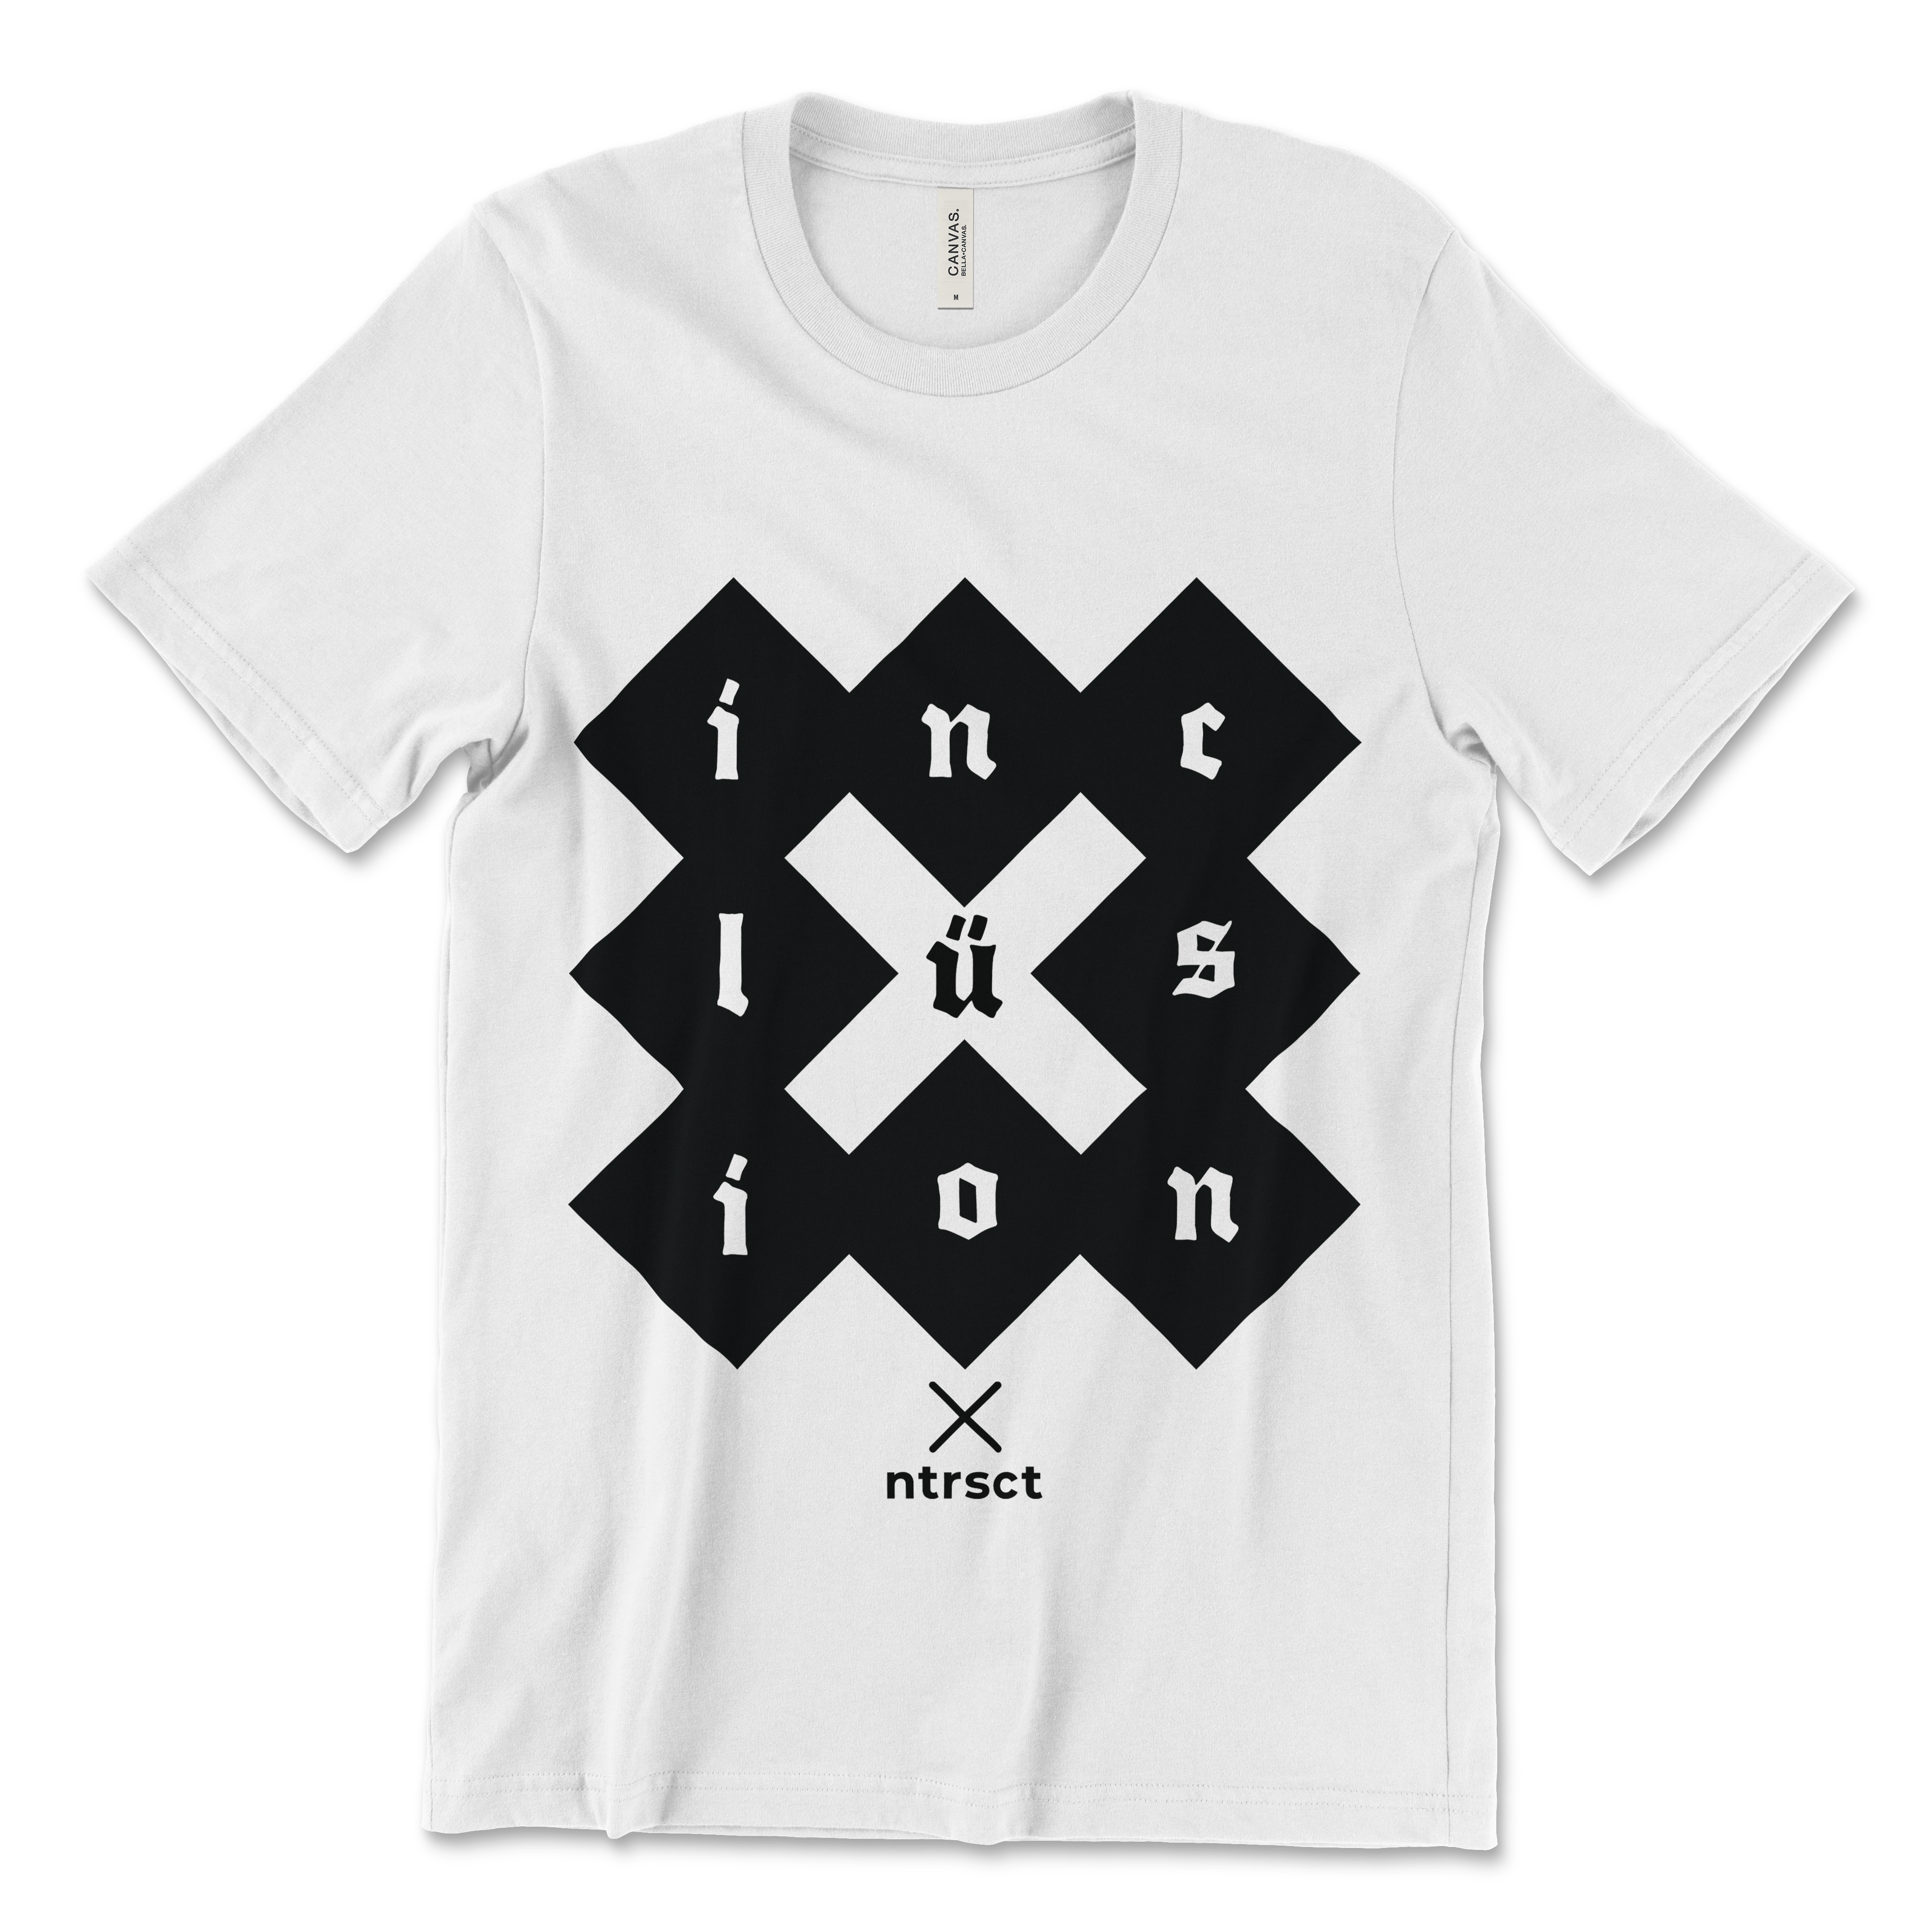 A digital mockup of the inclusion graphic in black ink on a white t-shirt